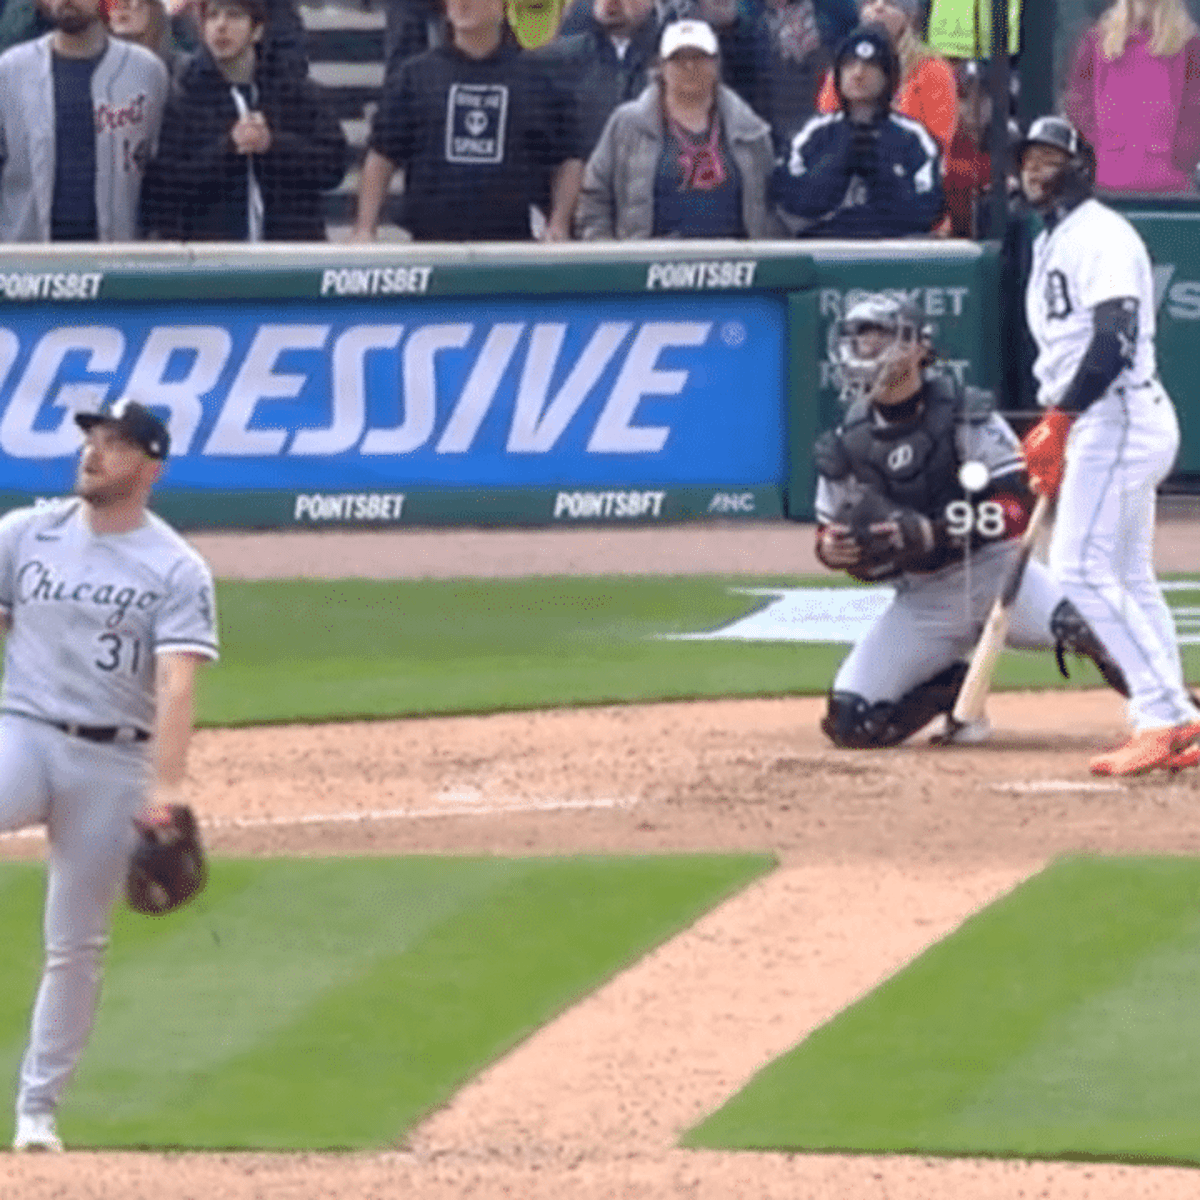 WATCH: White Sox' Liam Hendriks strikes out Tigers' Akil Baddoo